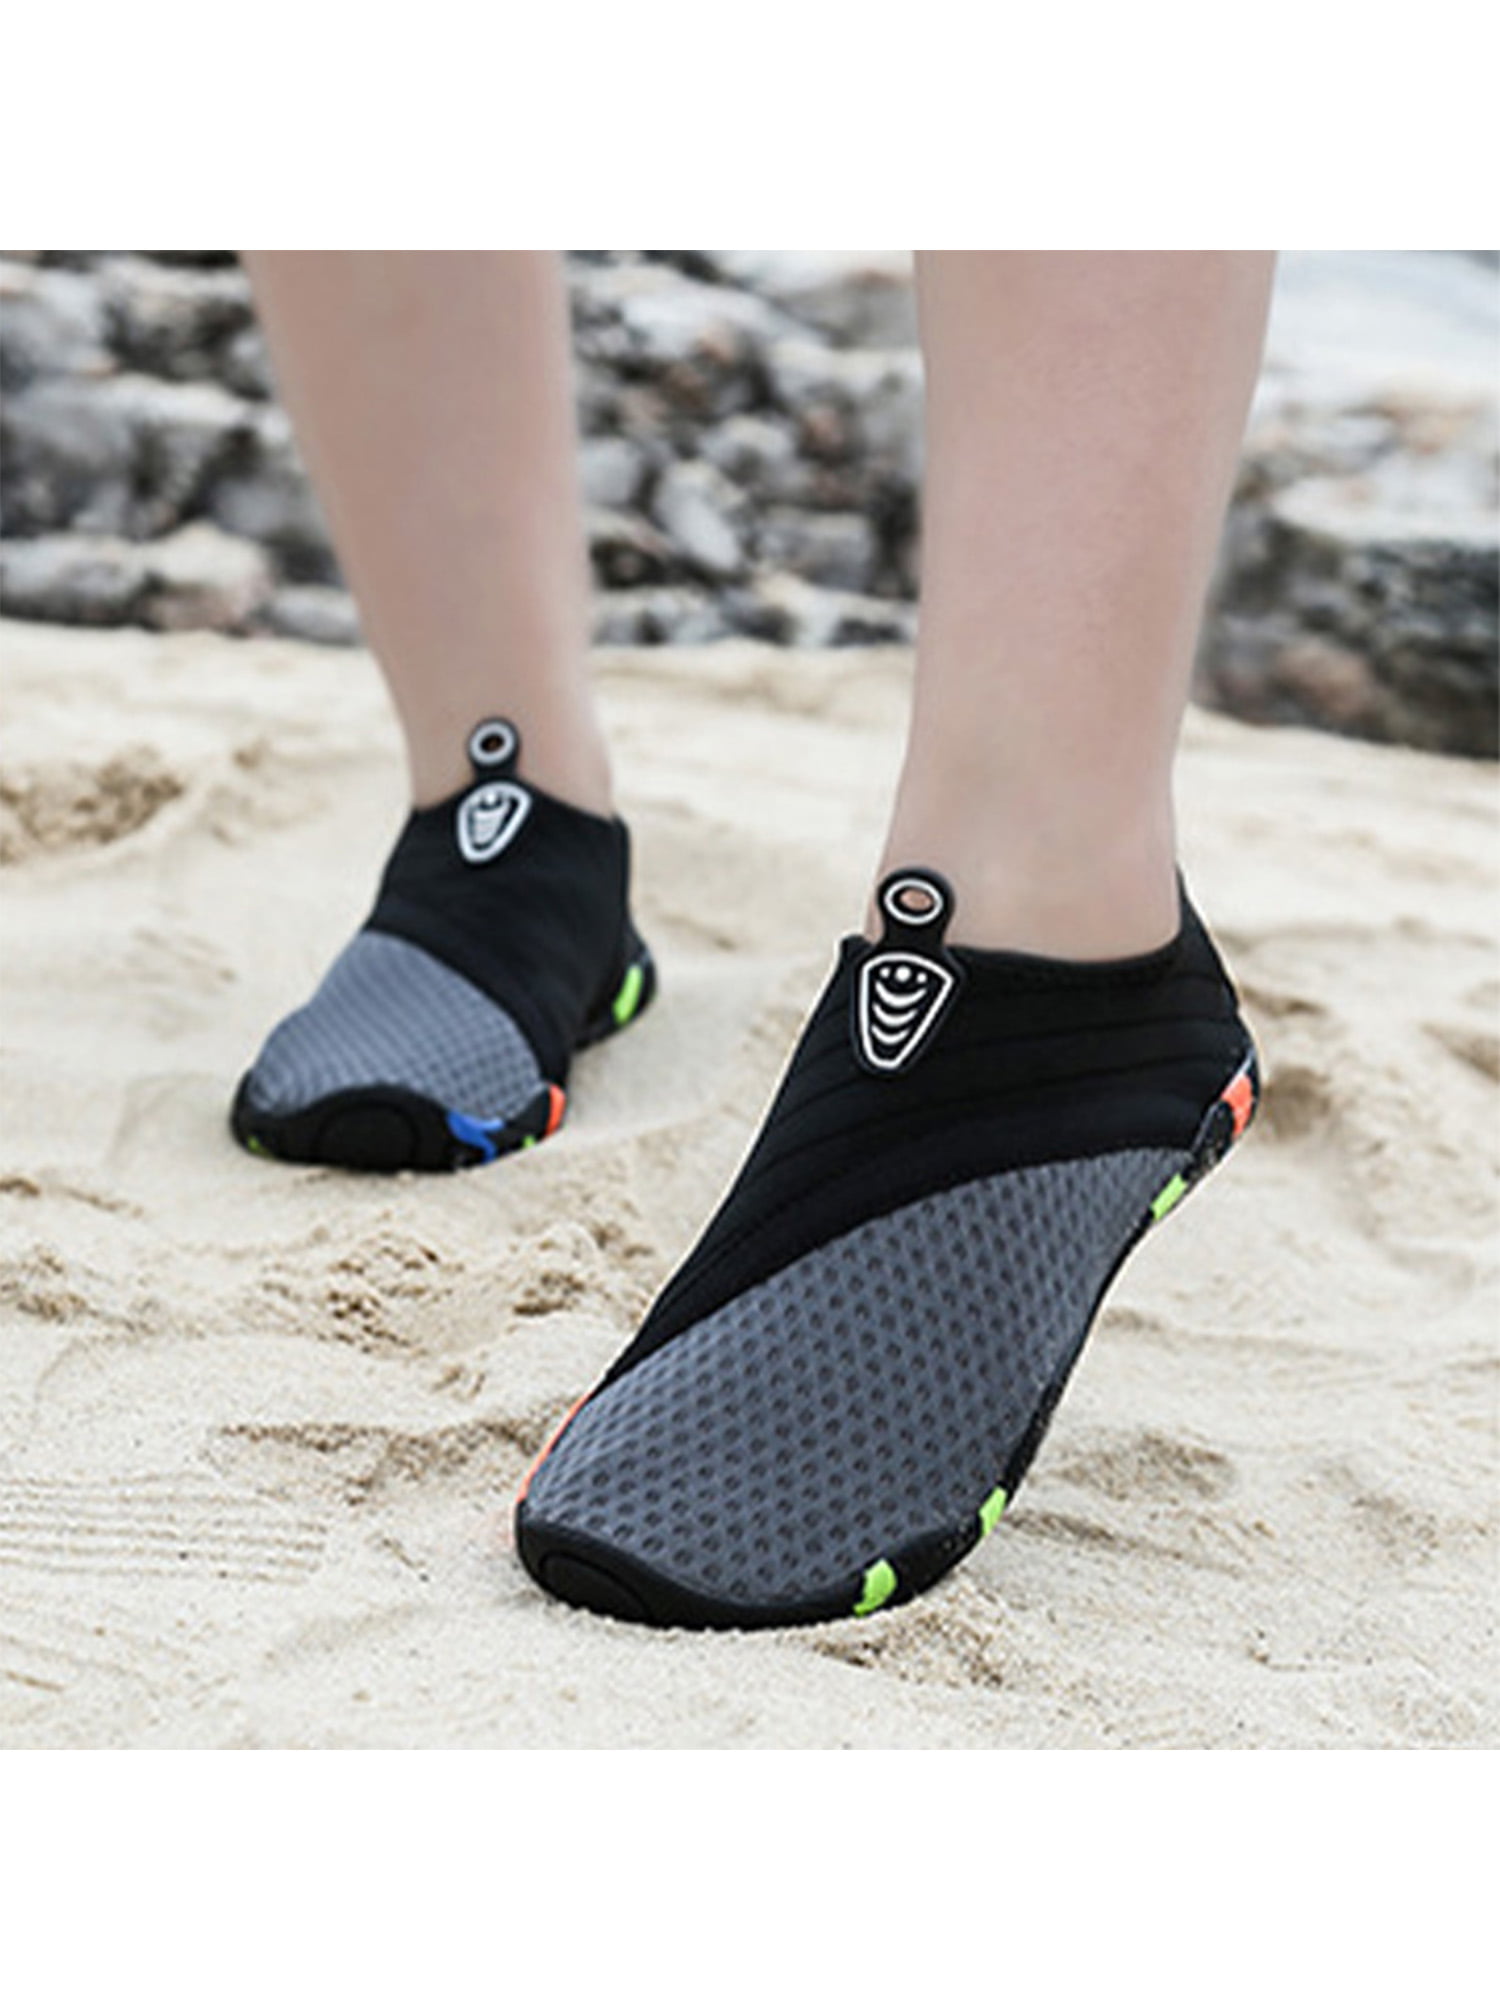 Womens Water Shoes Quick Dry Barefoot for Swim Diving Surf Aqua Sport Beach size